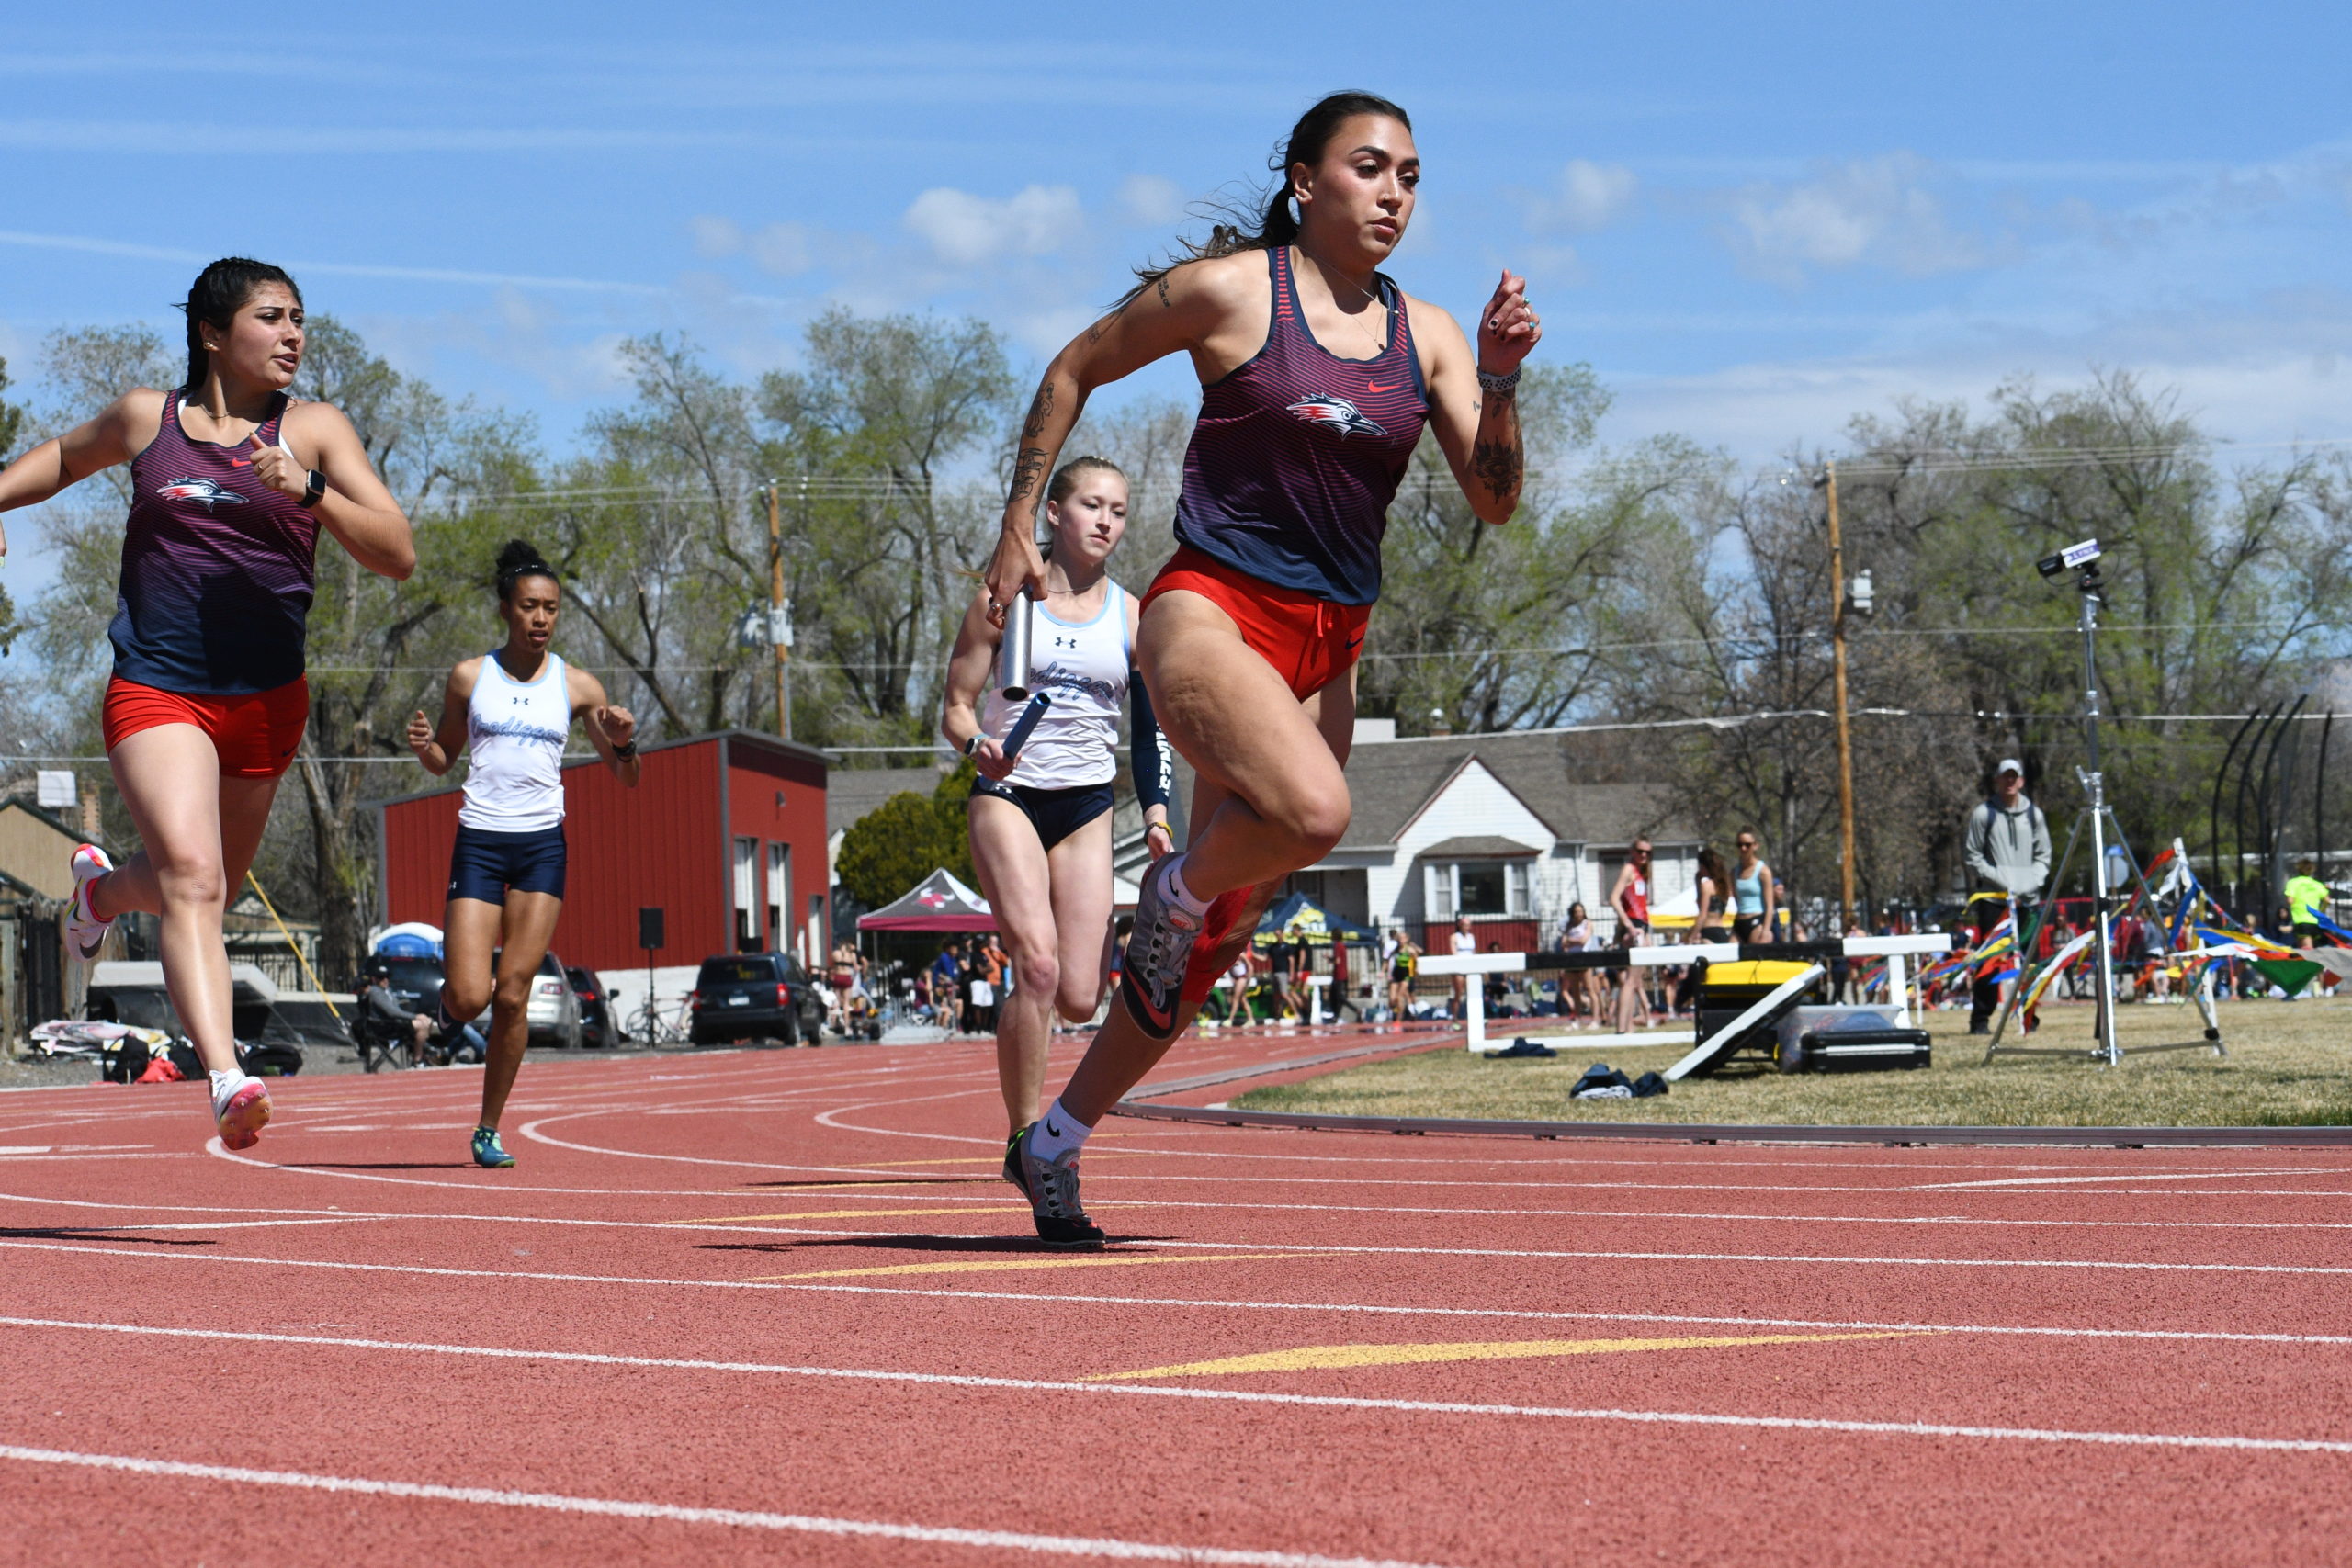 Women's track athlete Allyssa Romero leads during a relay race after receiving a handoff.